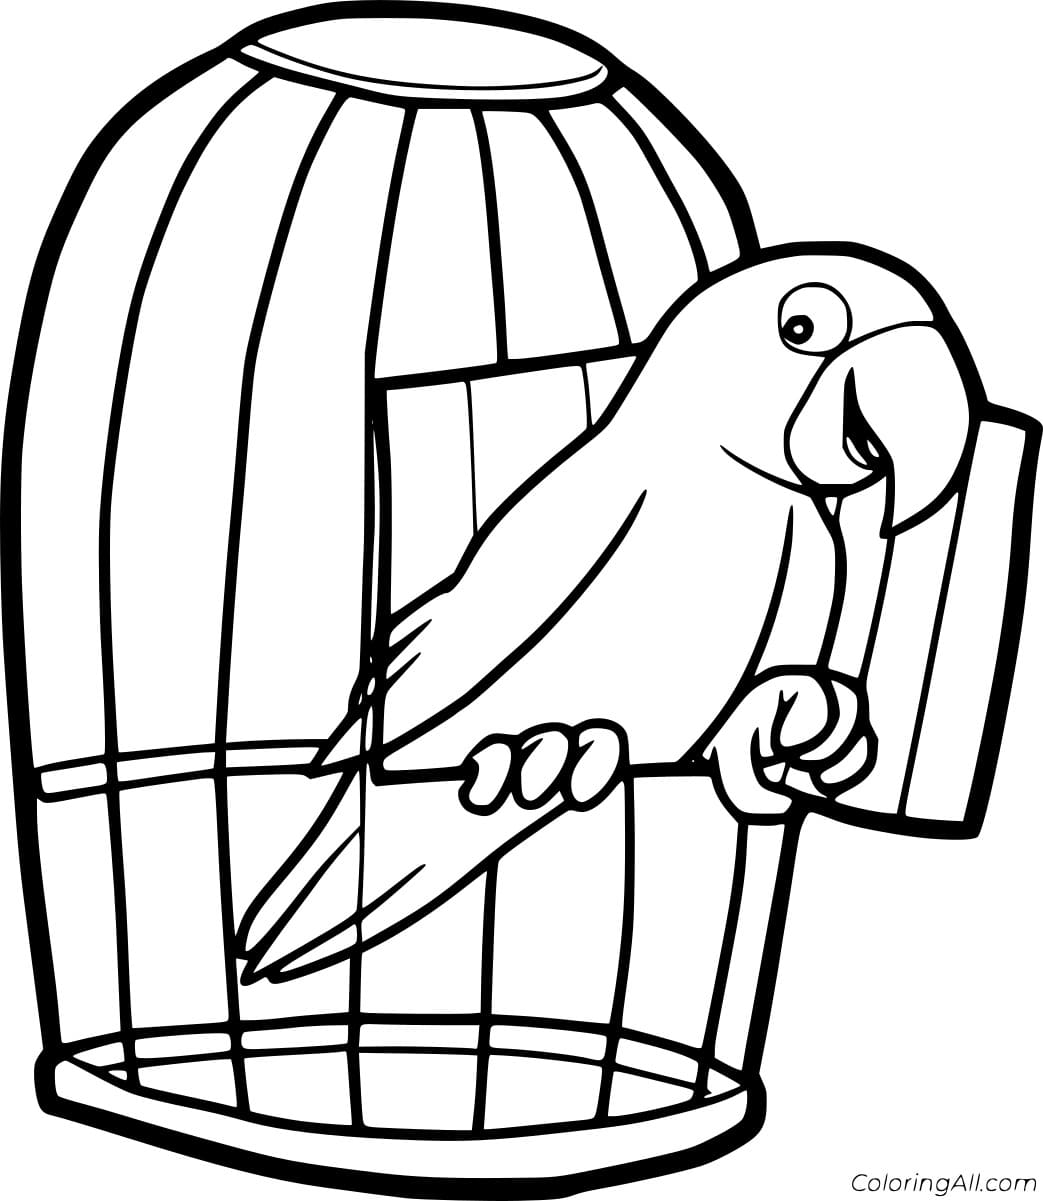 Parrot In The Cage Coloring Free Printable